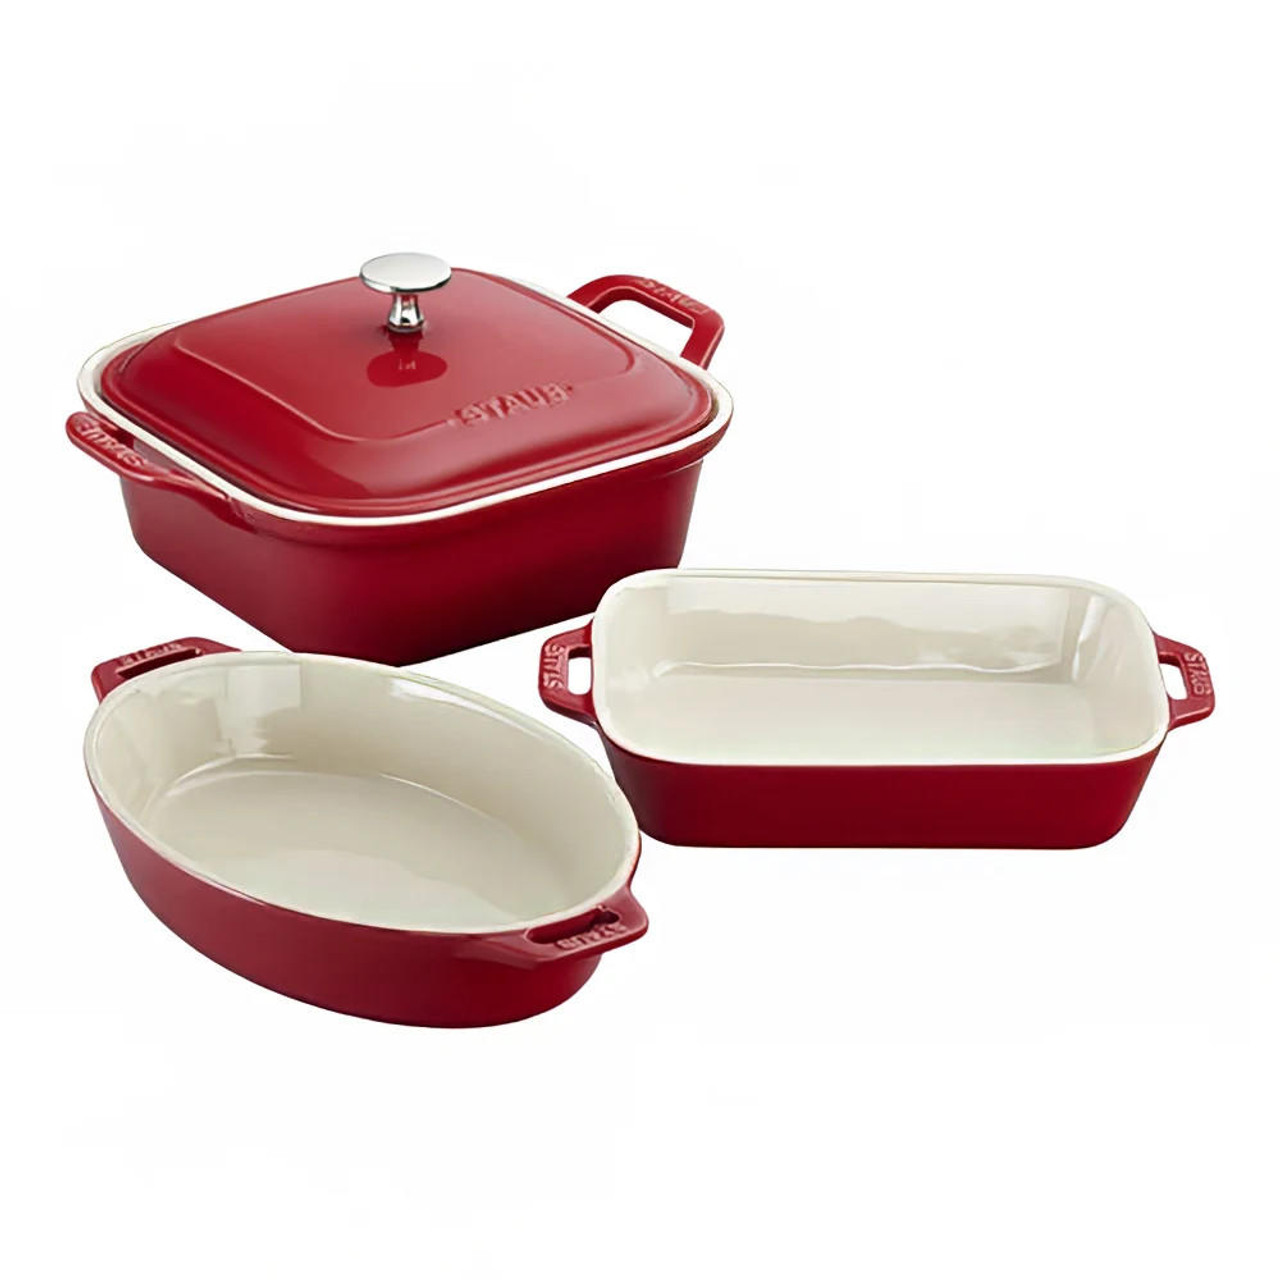  Staub 4-Piece Mixed Baking Dish Set - Ceramic, Cherry, Oval, Square with Lid 